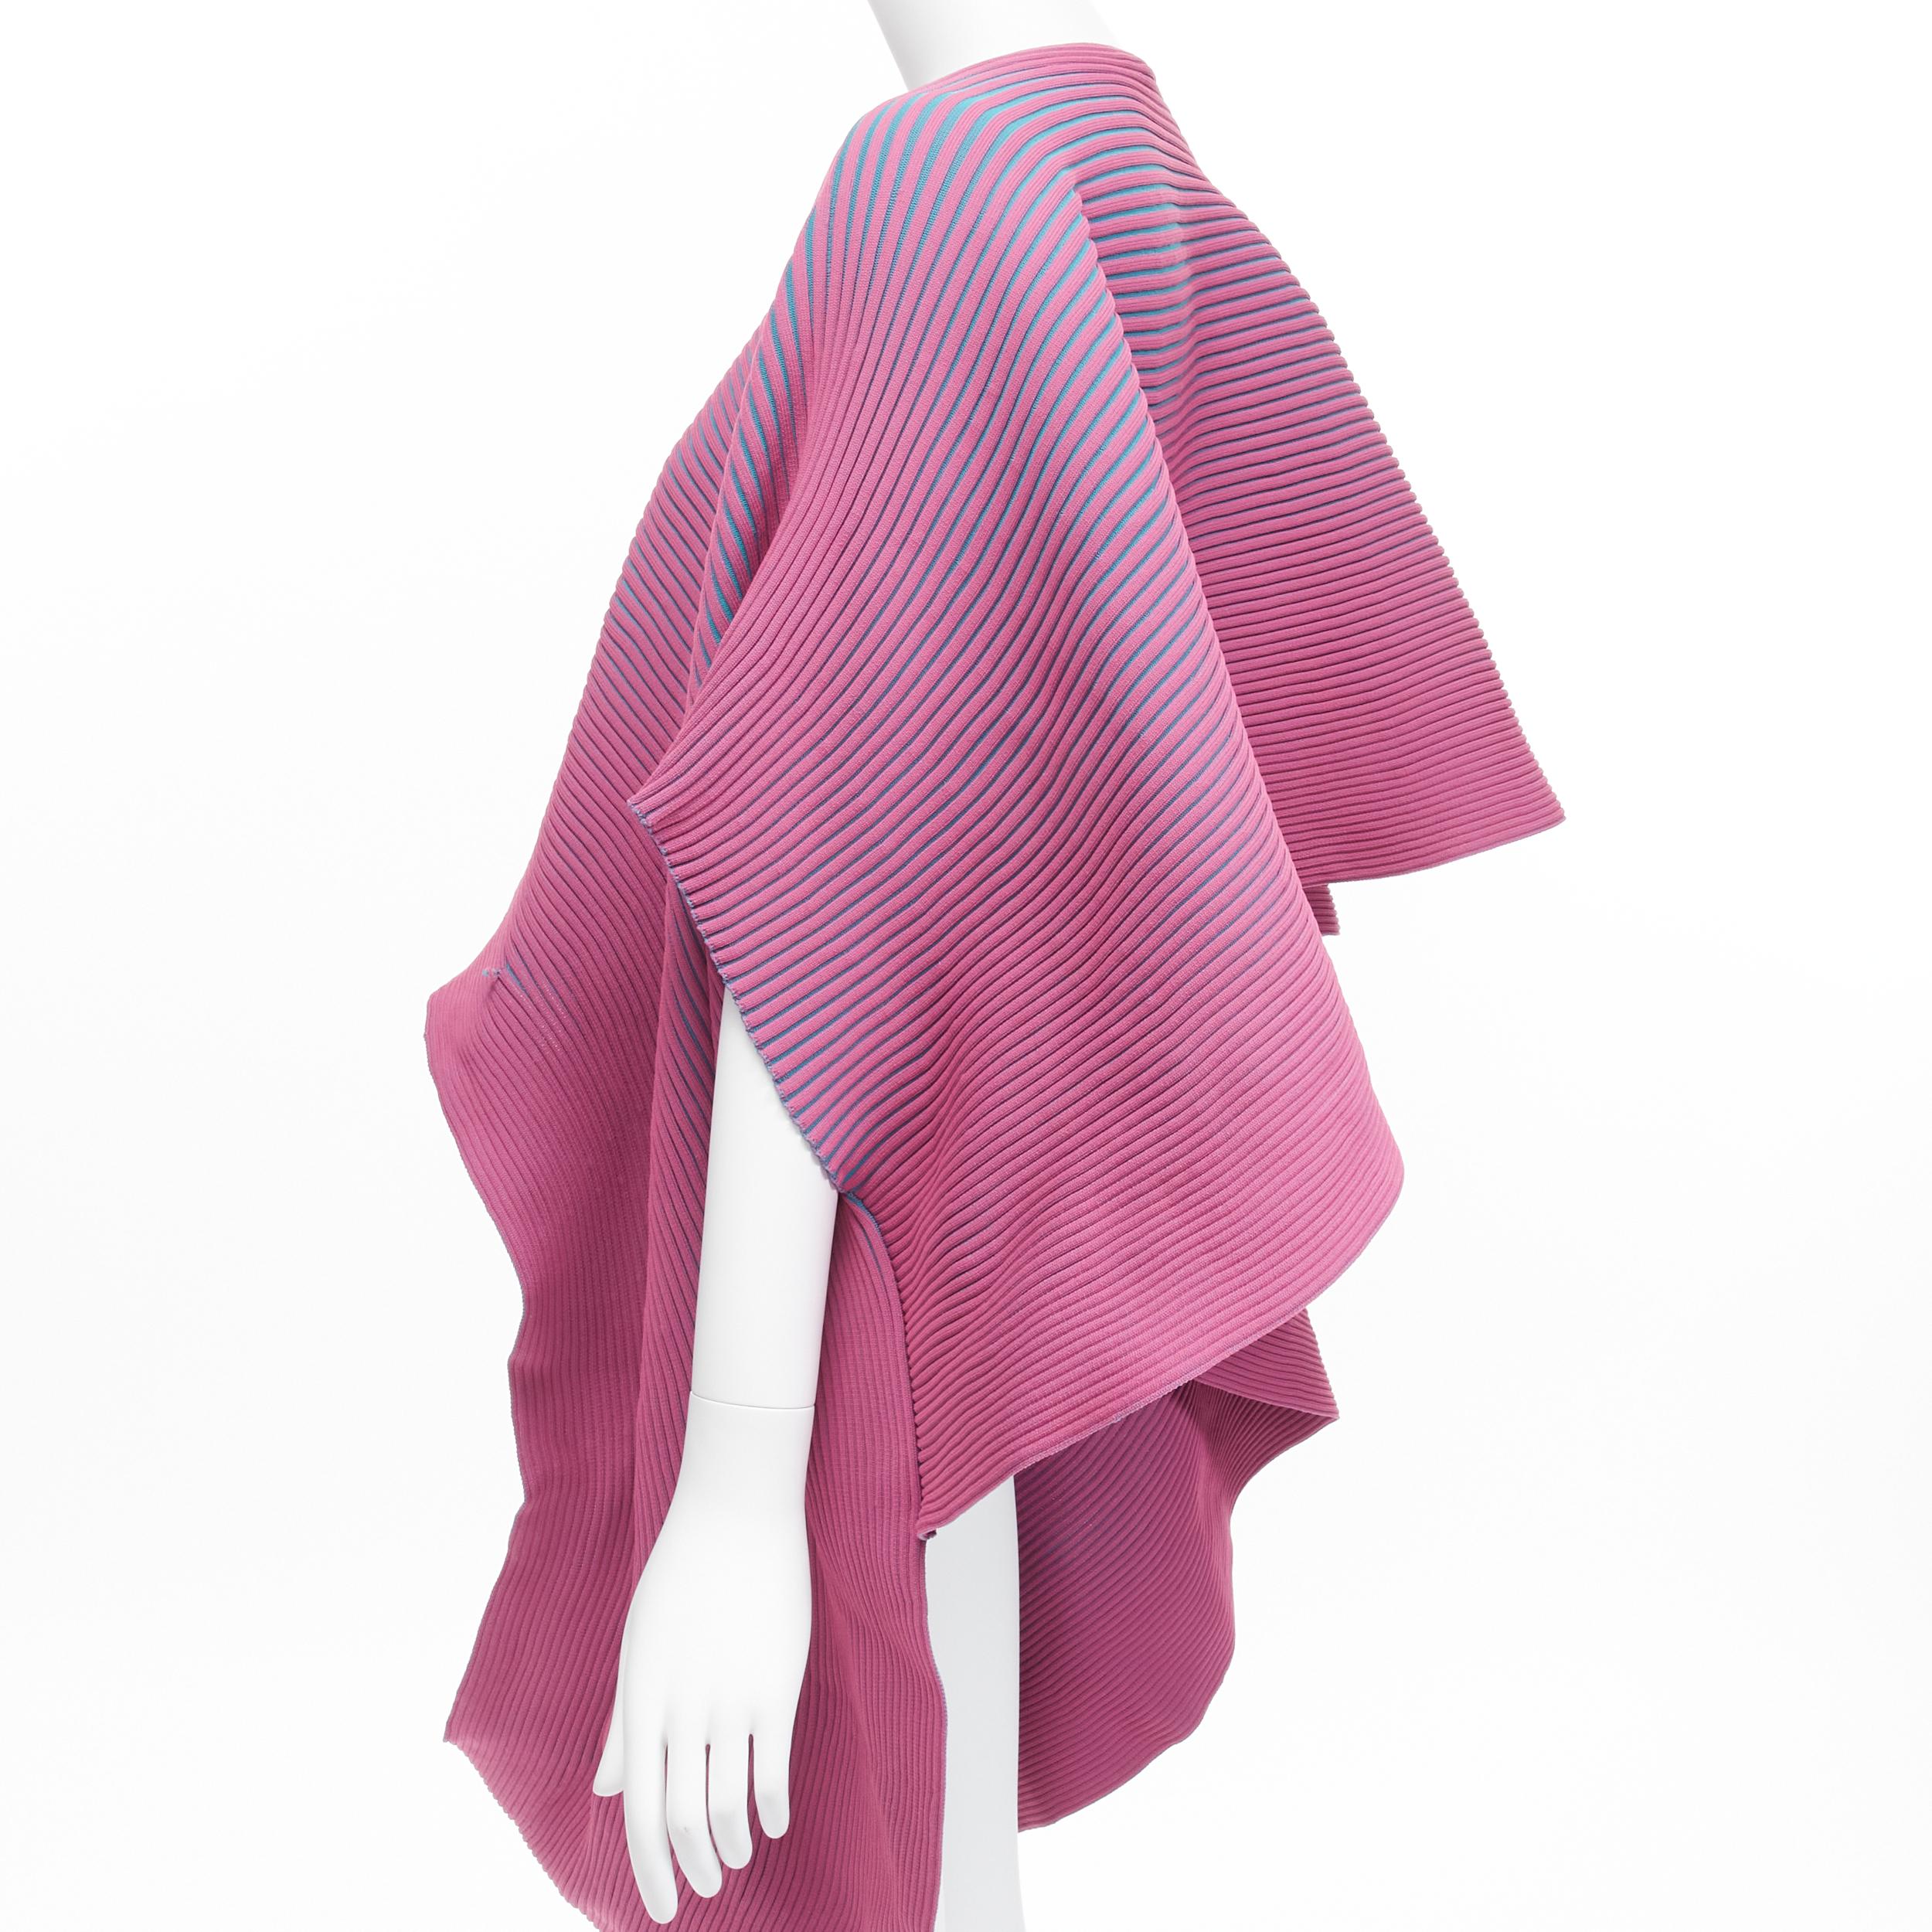 ISSEY MIYAKE 2022 pink blue ribbed knit 3D circle cut draped sweater top JP2 M
Reference: TGAS/D00124
Brand: issey Miyake
Collection: Spring 2022
Material: Polyester
Color: Pink, Blue
Pattern: Solid
Closure: Slip On
Extra Details: Fabric looks